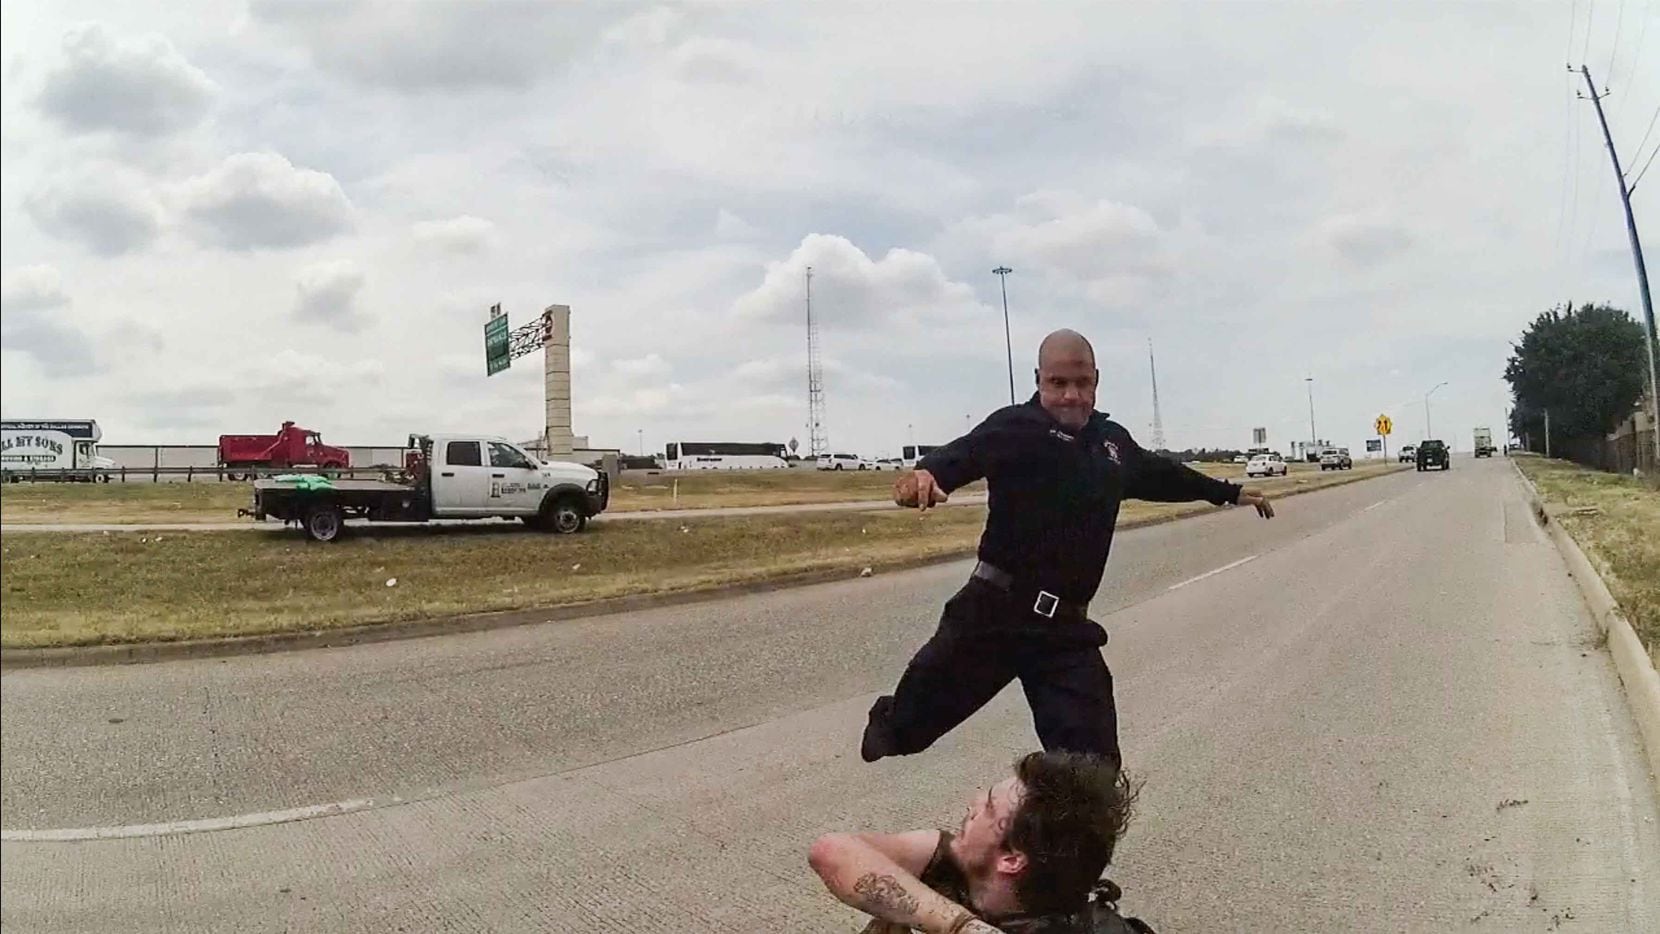 A frame from a police body cam showing  Dallas firefighter Brad Cox during an altercation with Kyle Robert Vess on August 2, 2019.